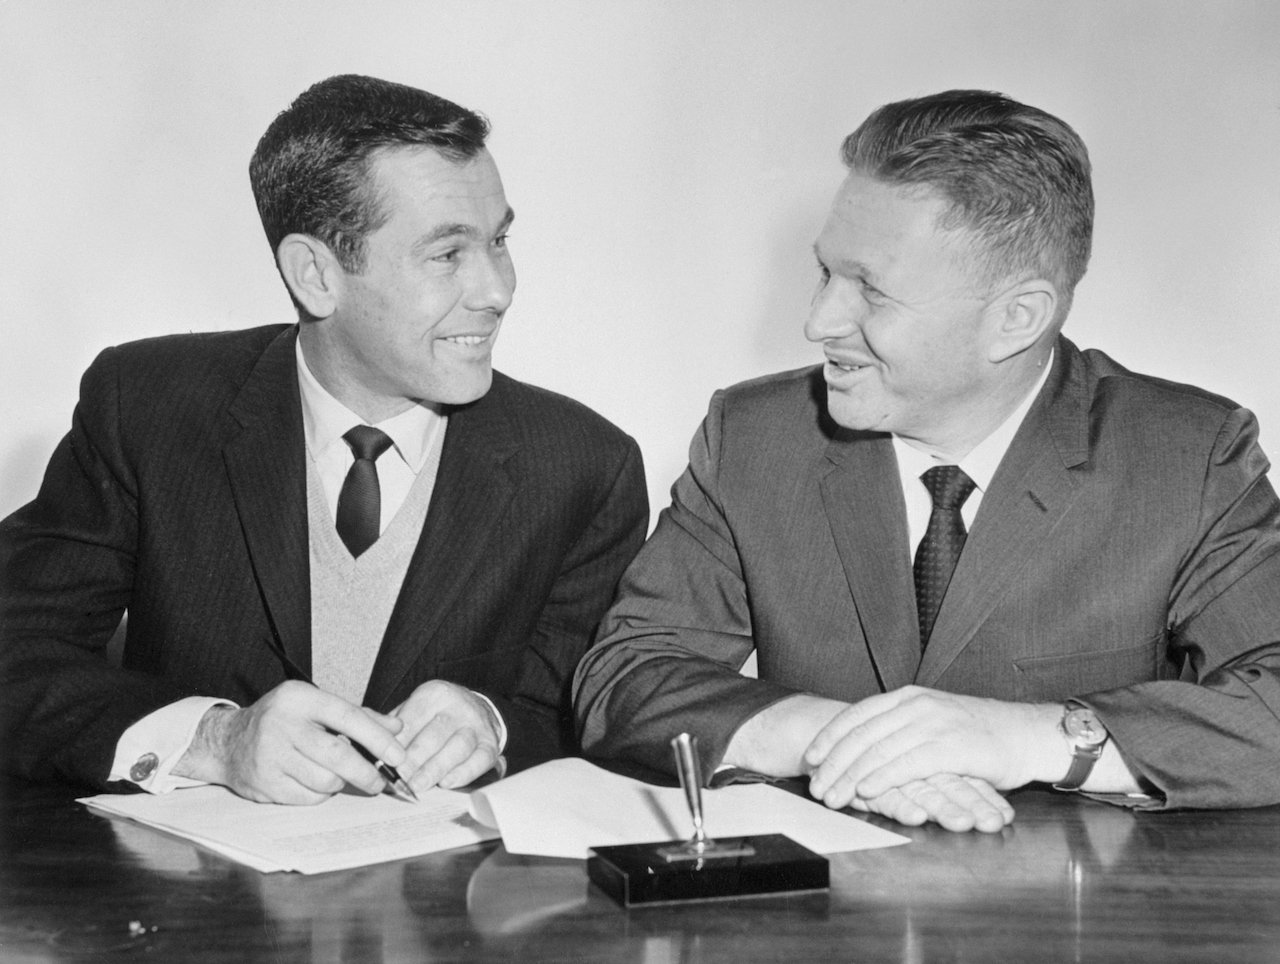 Johnny Carson (l) signs his new contract with the National Broadcasting Company for "The Tonight Show, Starring Johnny Carson,"